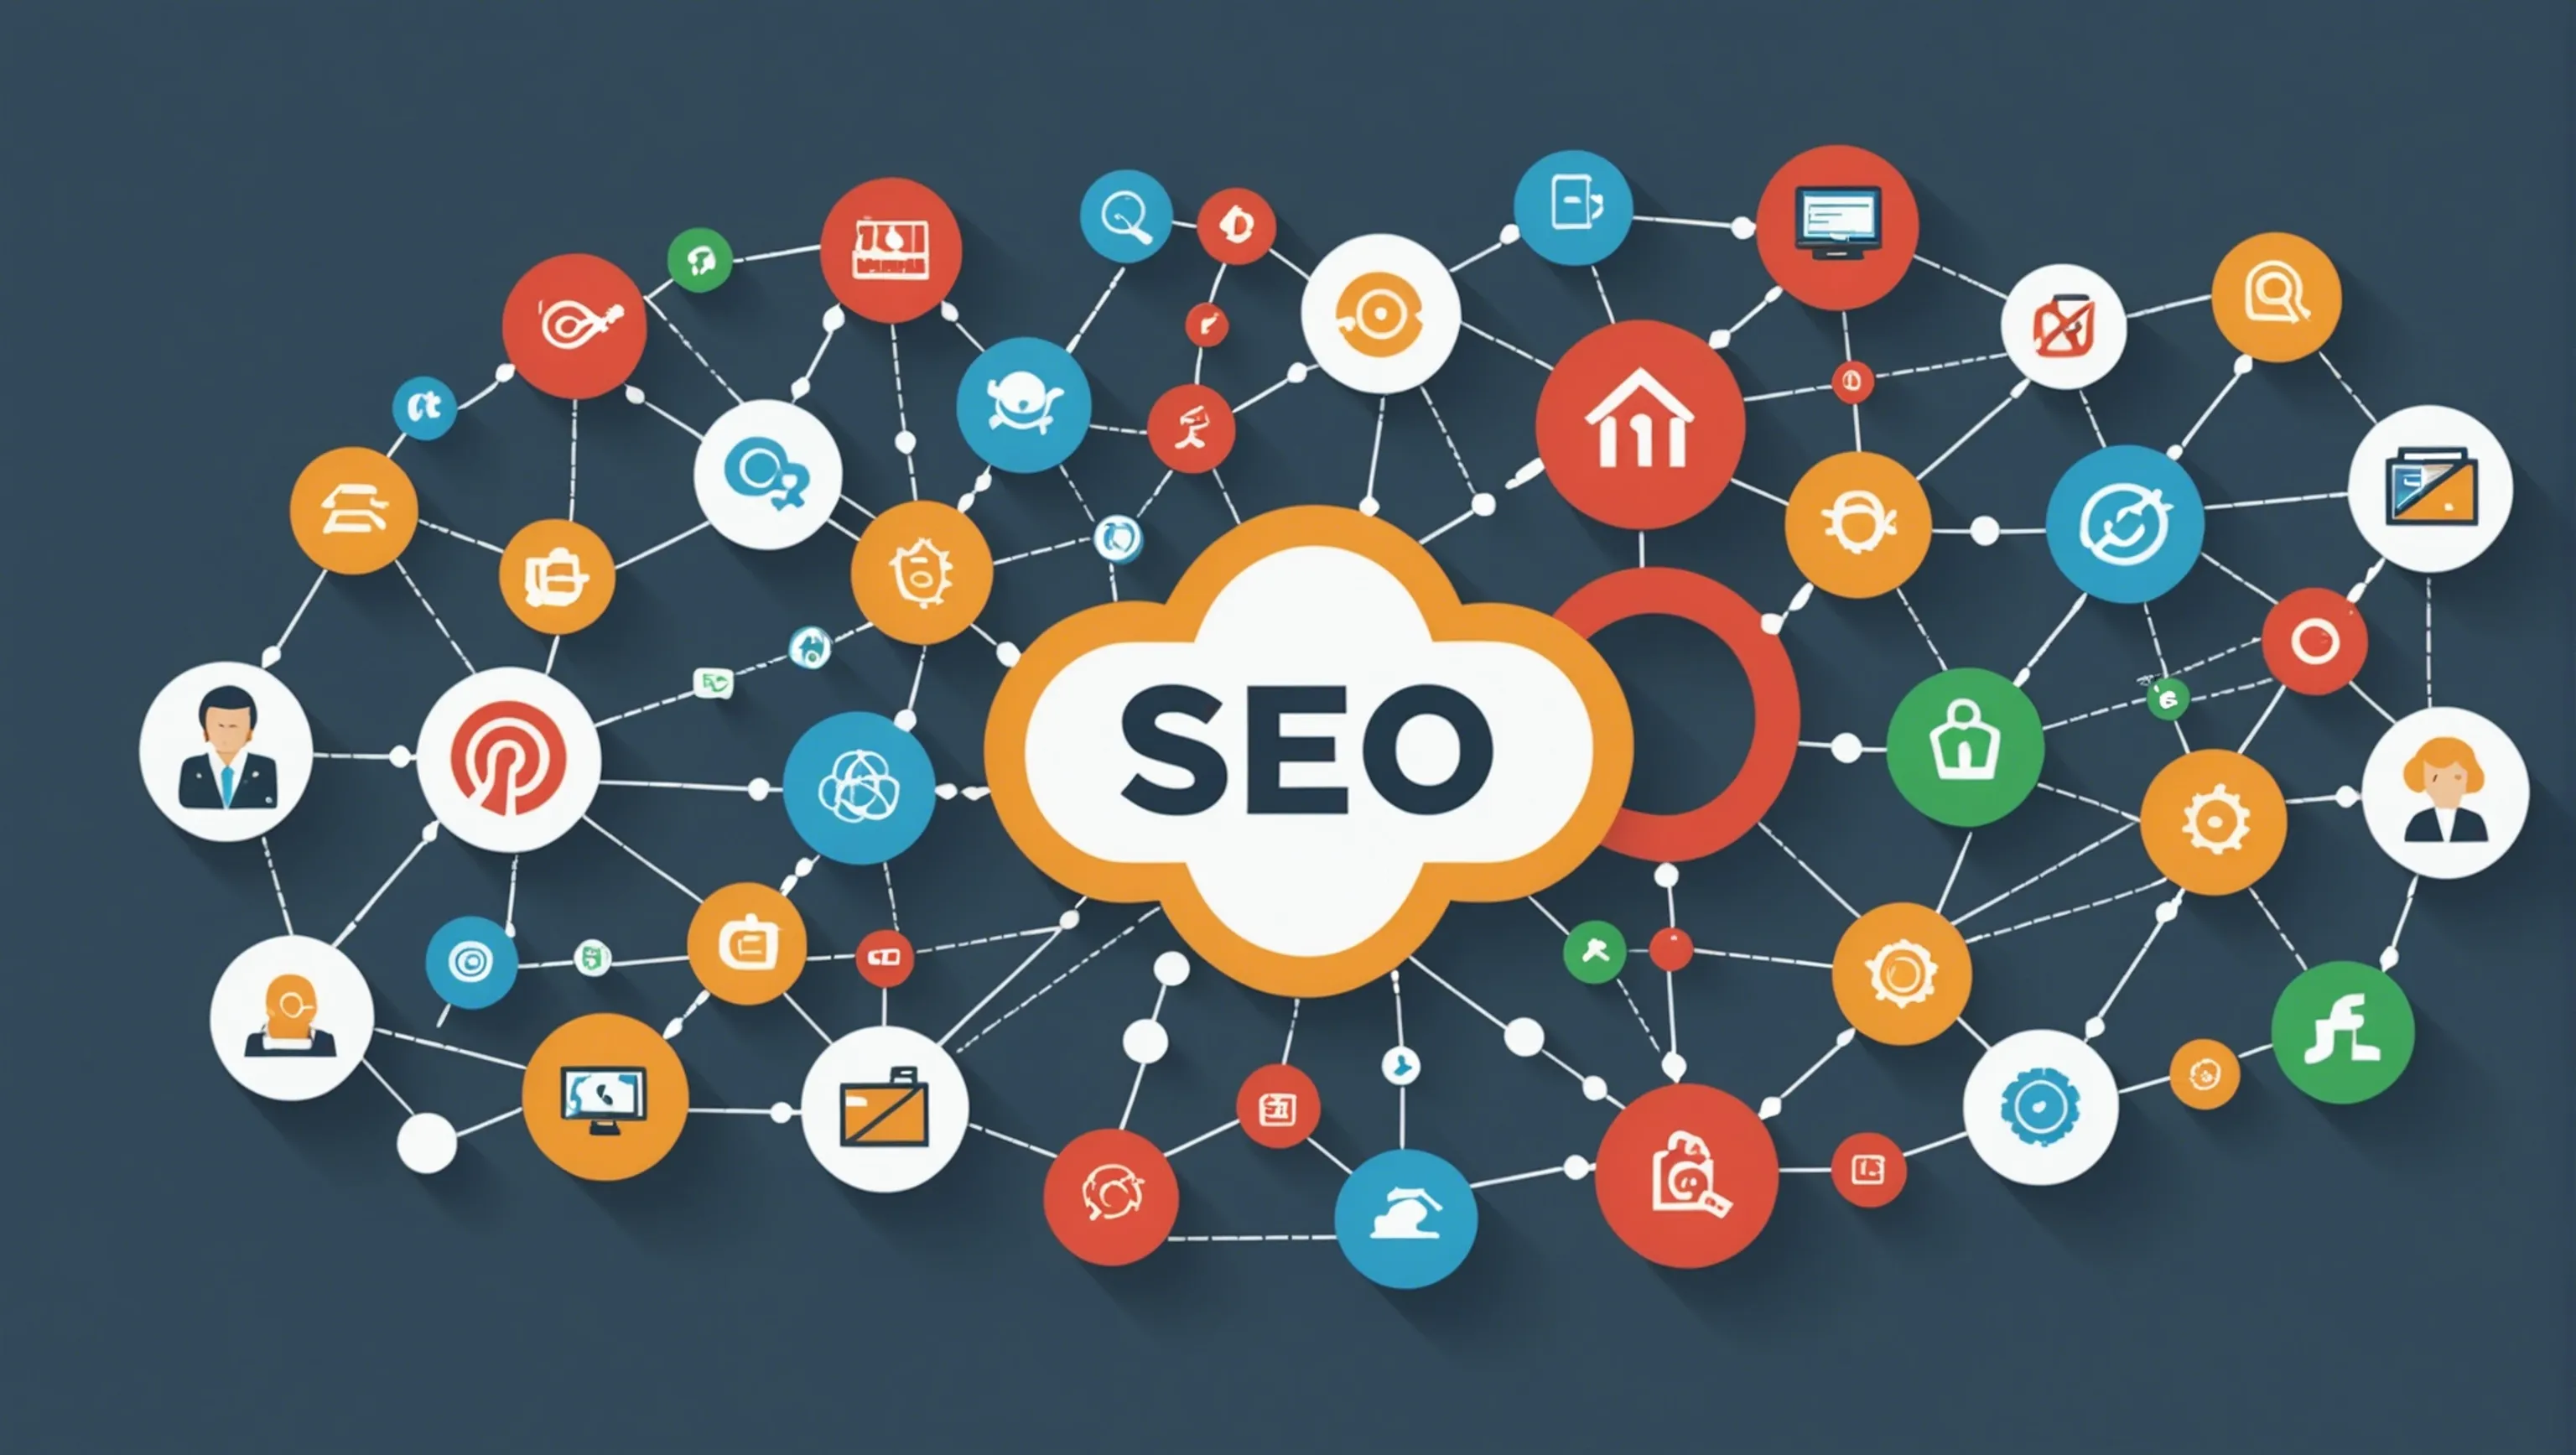 Importance of Linking for SEO